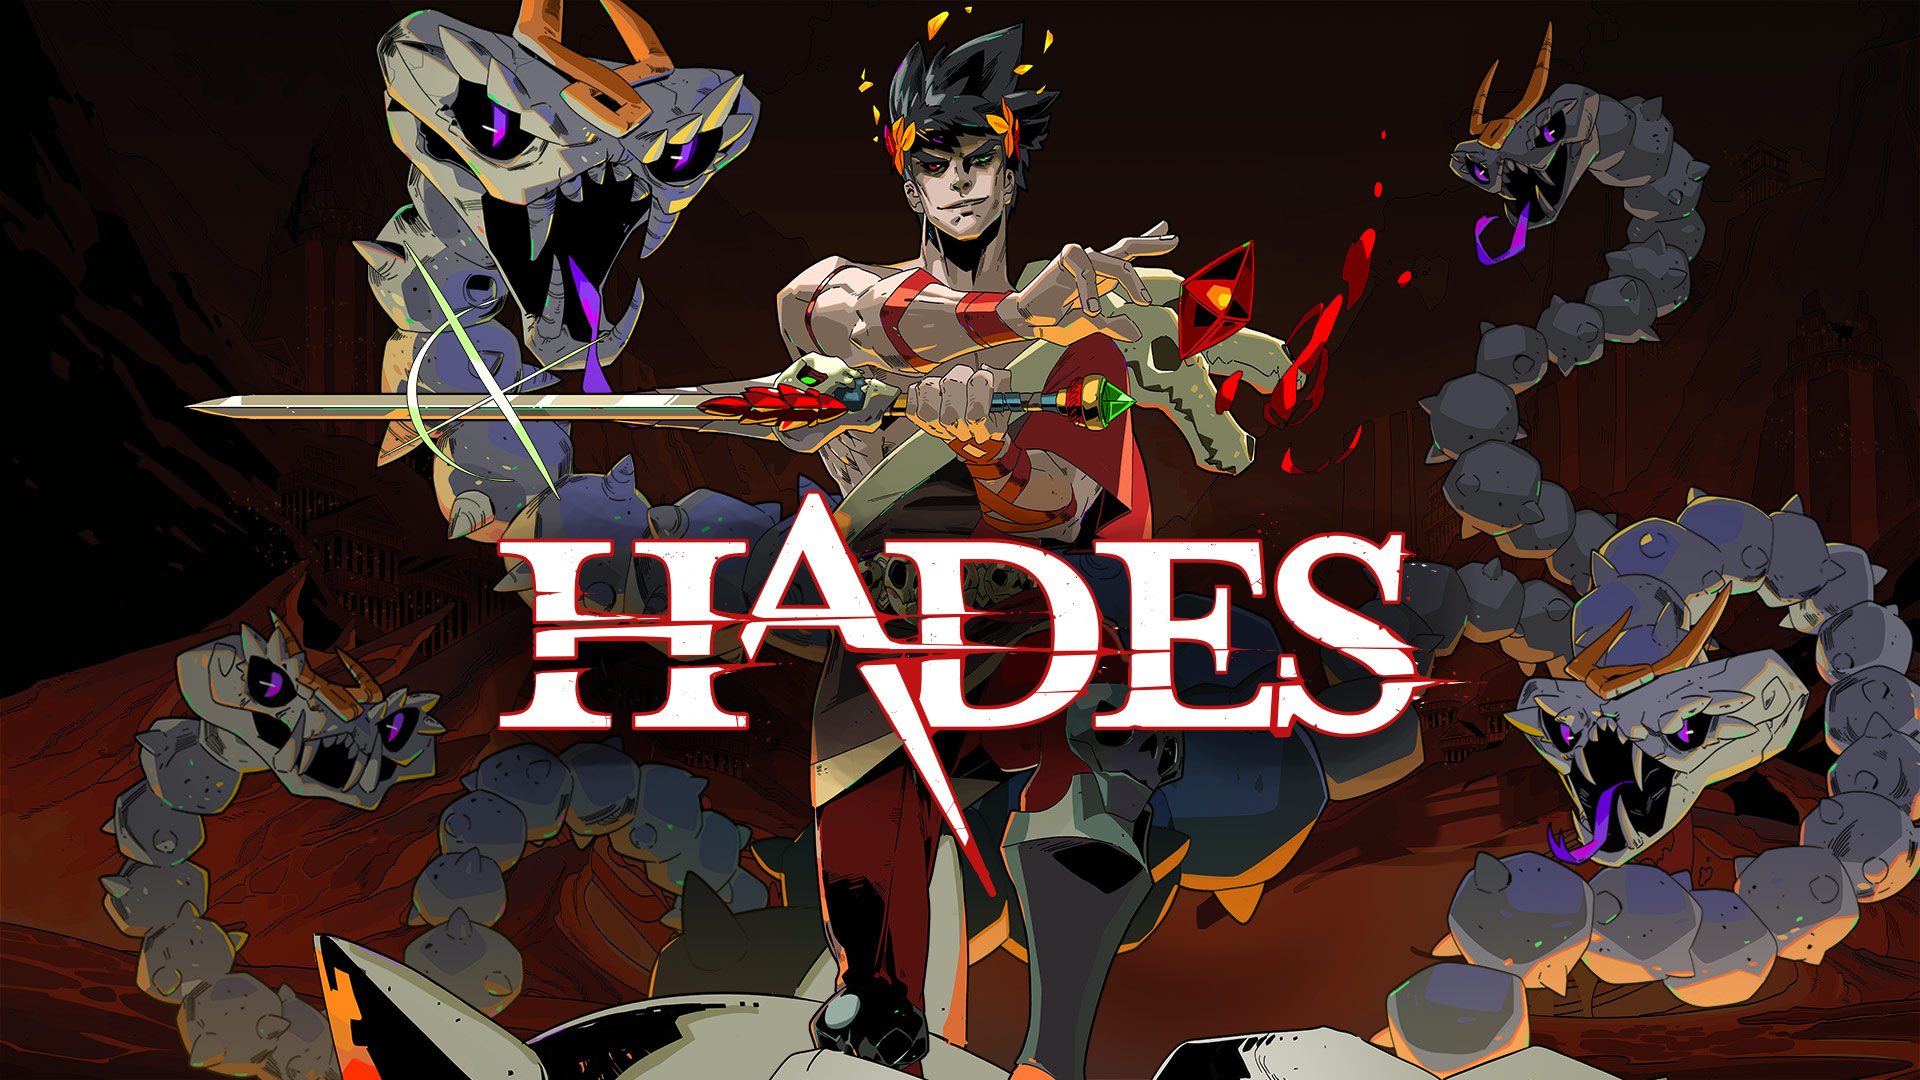 HADES Nintendo Switch Video Games From Japan Multi-Language NEW